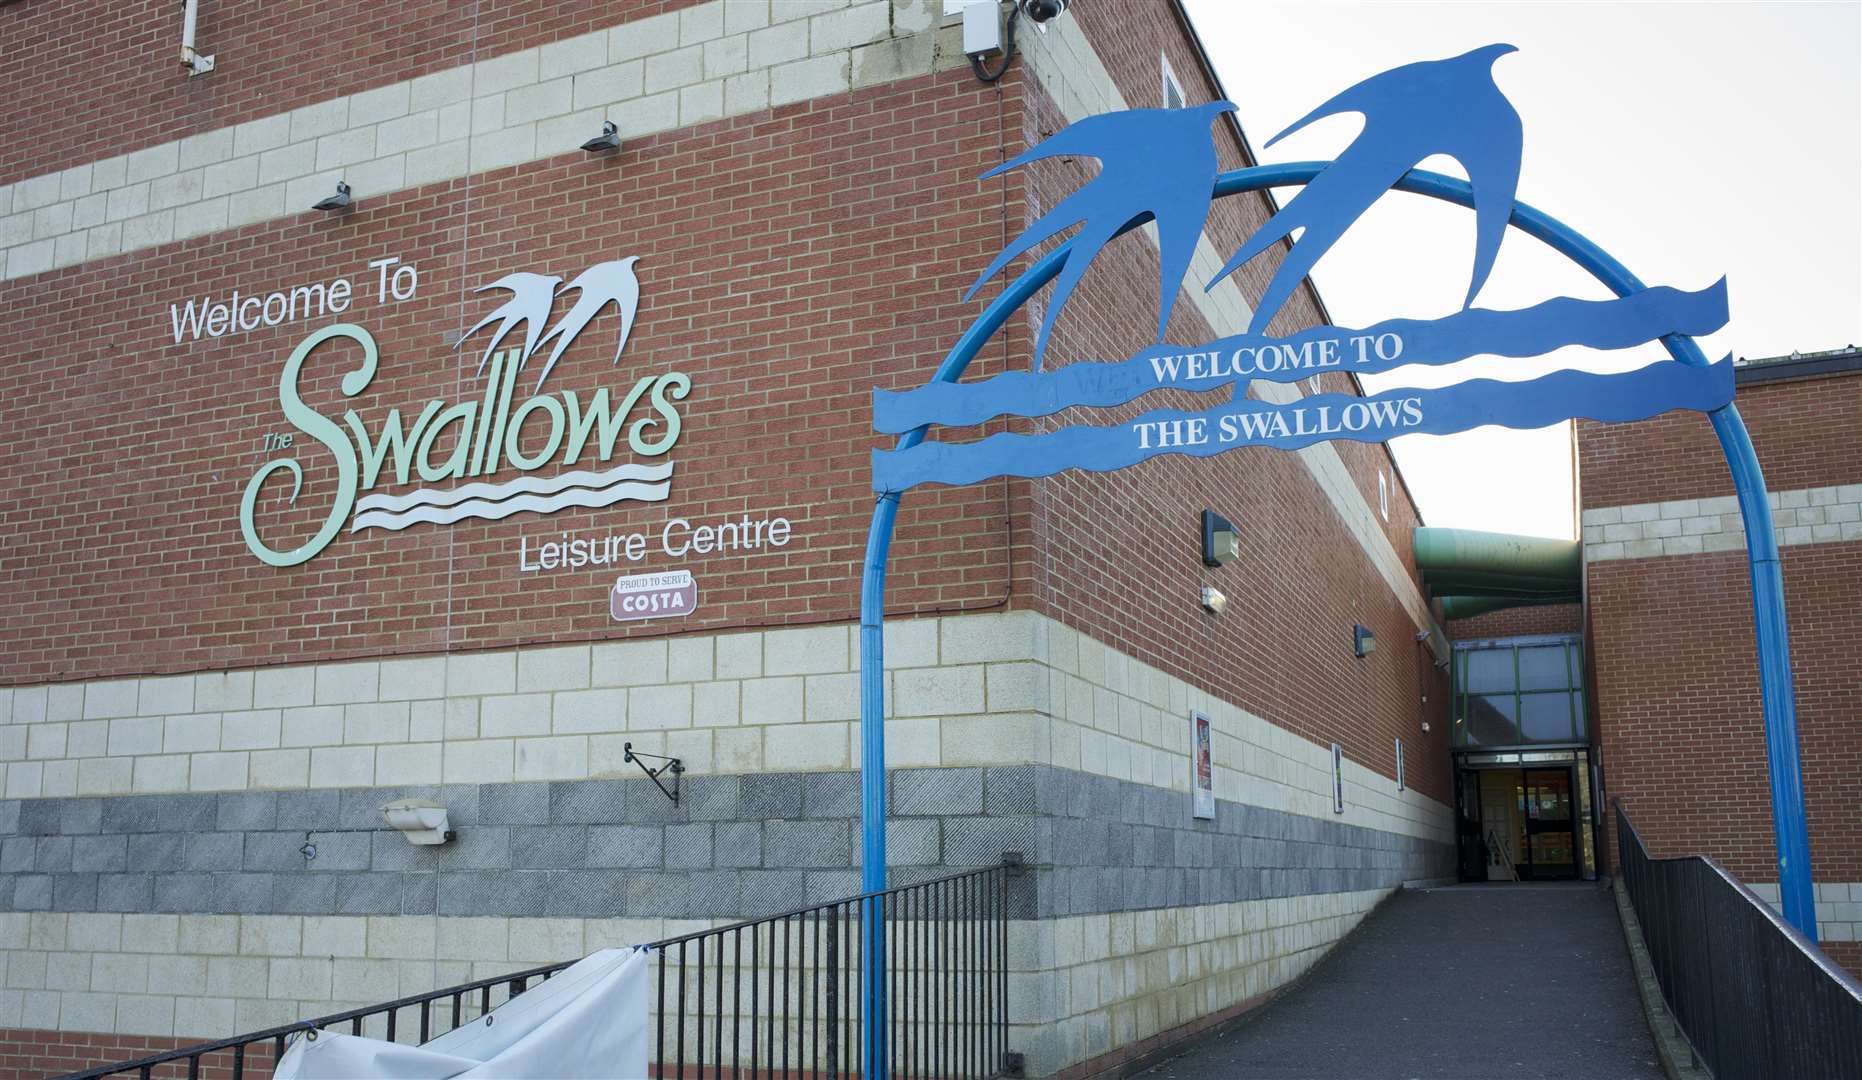 The Swallows Leisure Centre